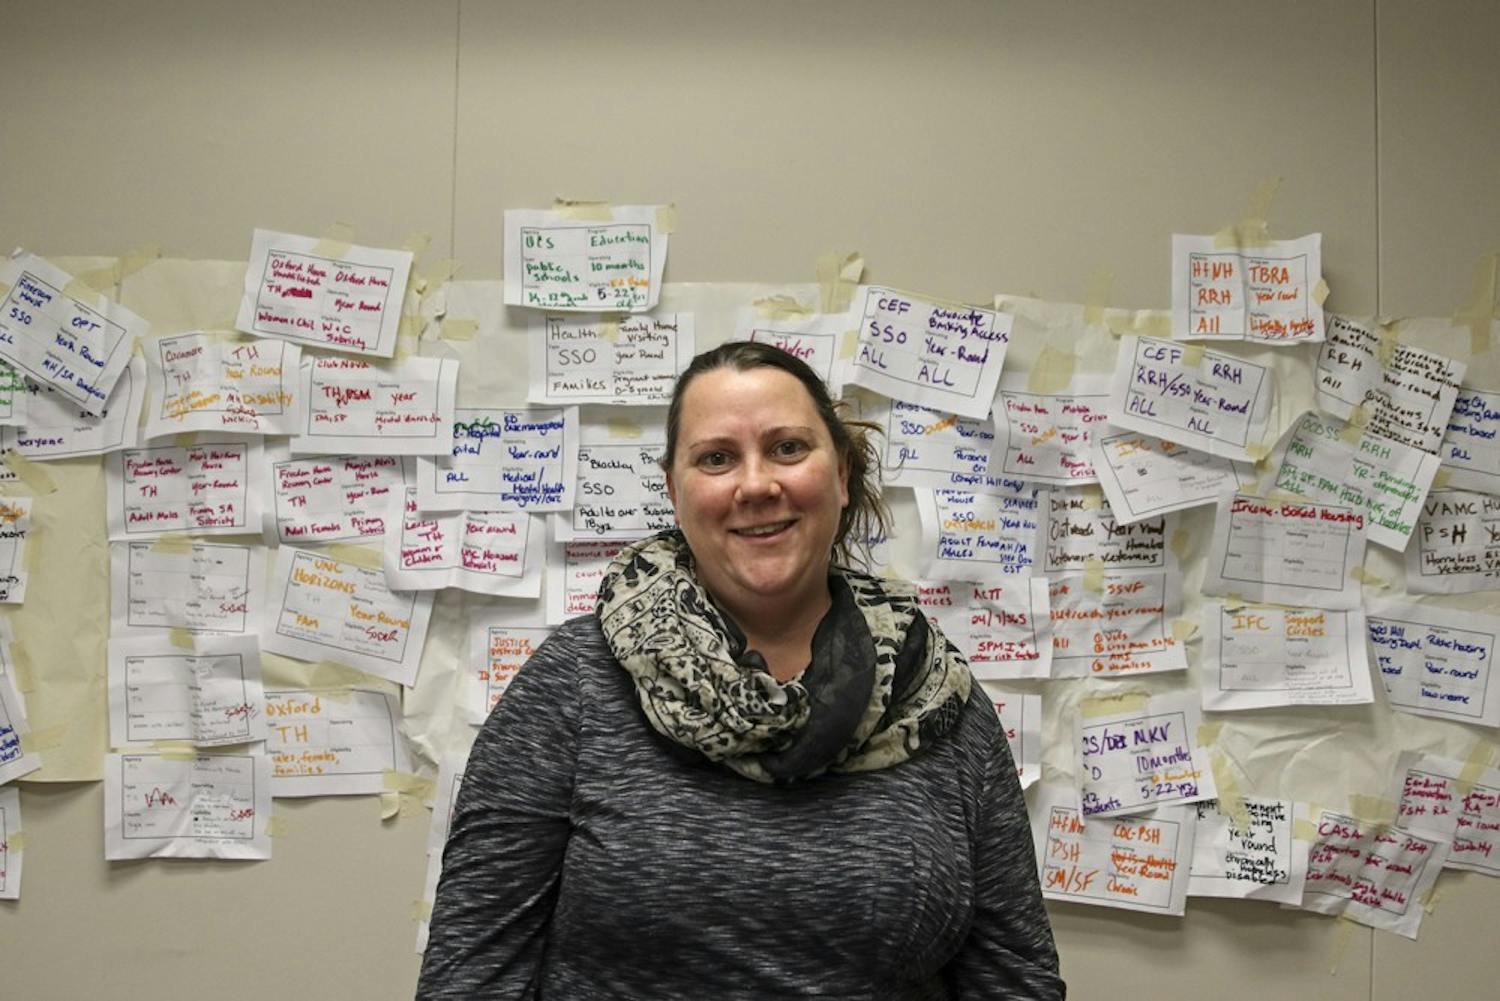 Corey Root is the Homeless Program coordinator for Orange County. Behind her is a wall covered in different cases of people she plans to enter into the system.